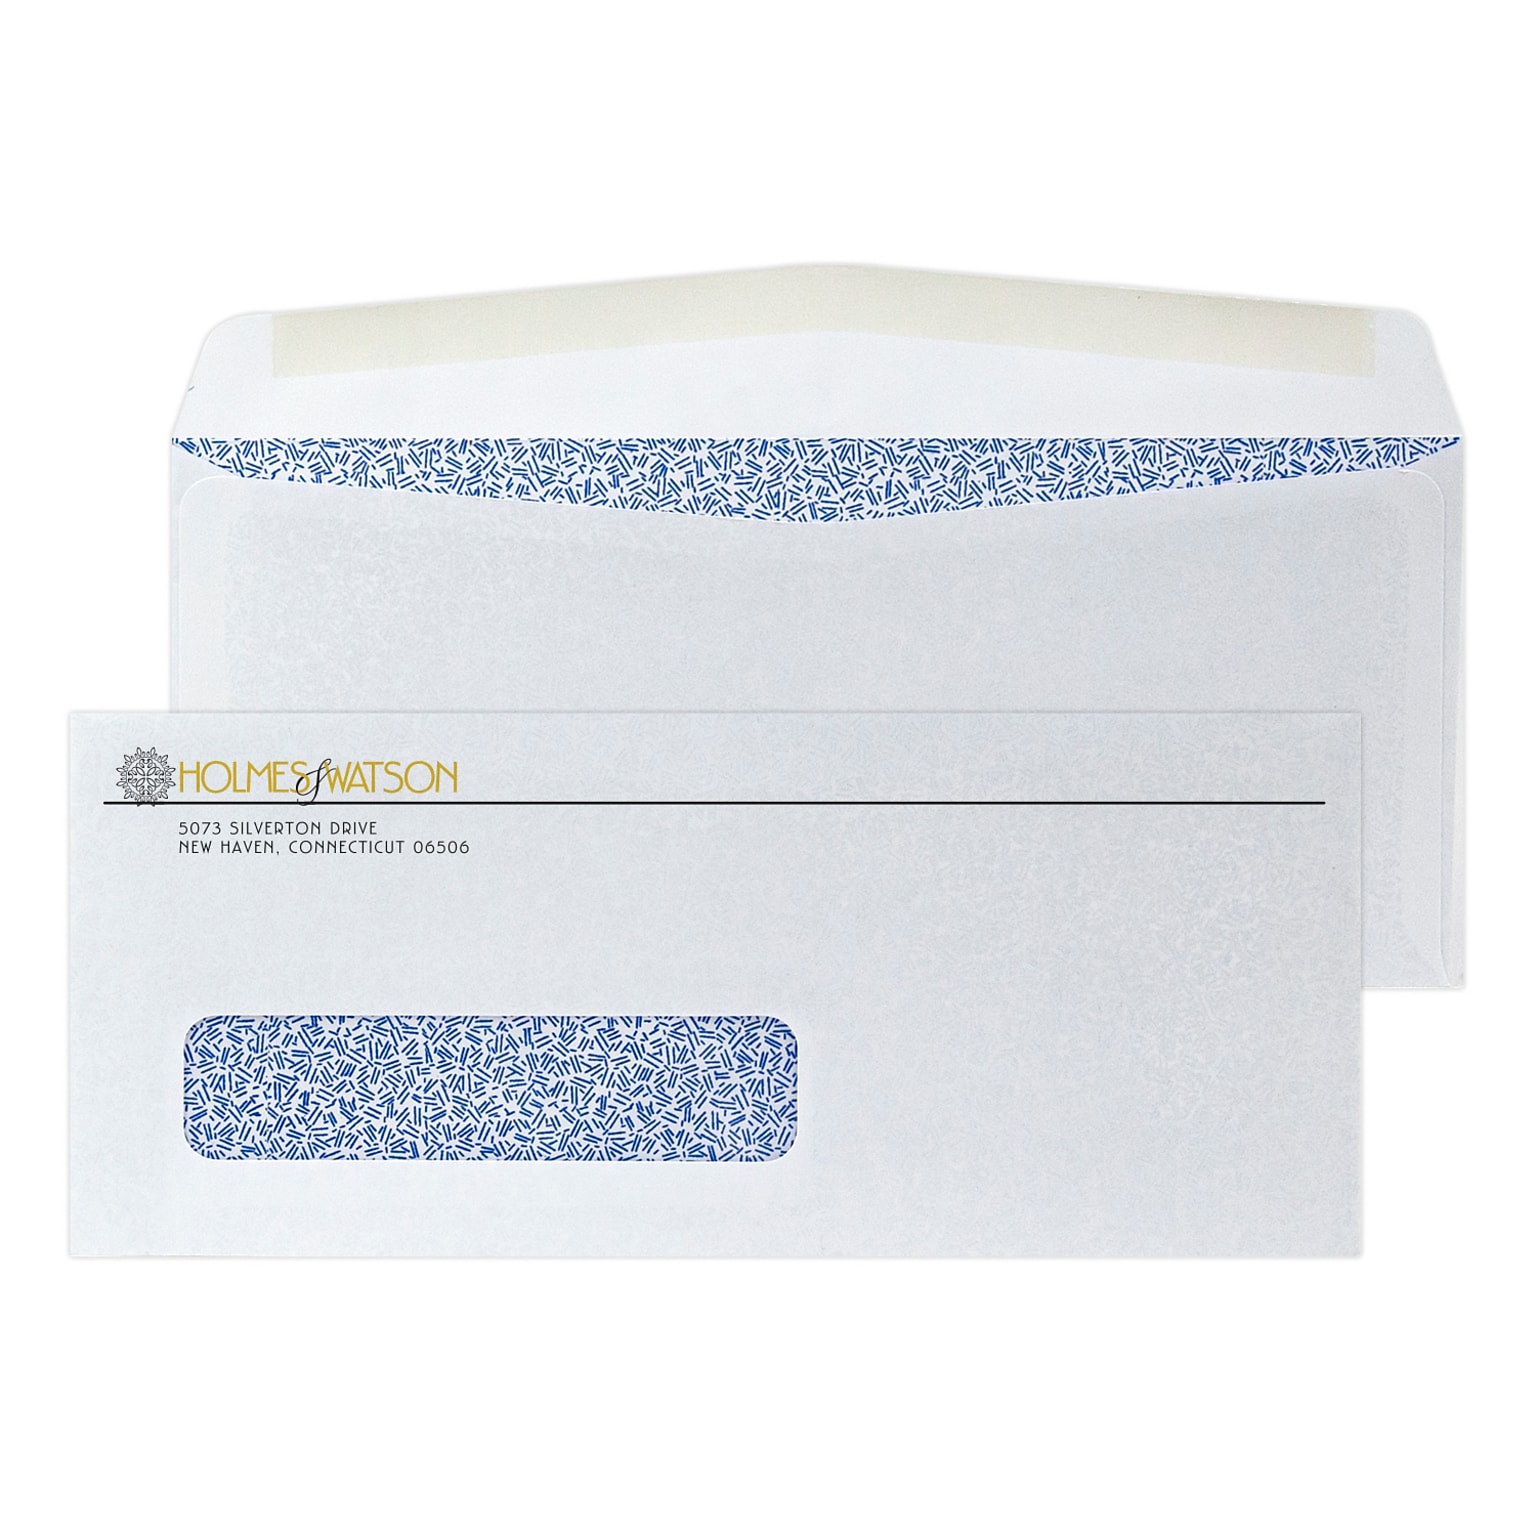 Custom #10 Window Envelopes with Security Tint, 4 1/4 x 9 1/2, 24# White Wove, 1 Standard and 1 Custom Inks, 250 / Pack